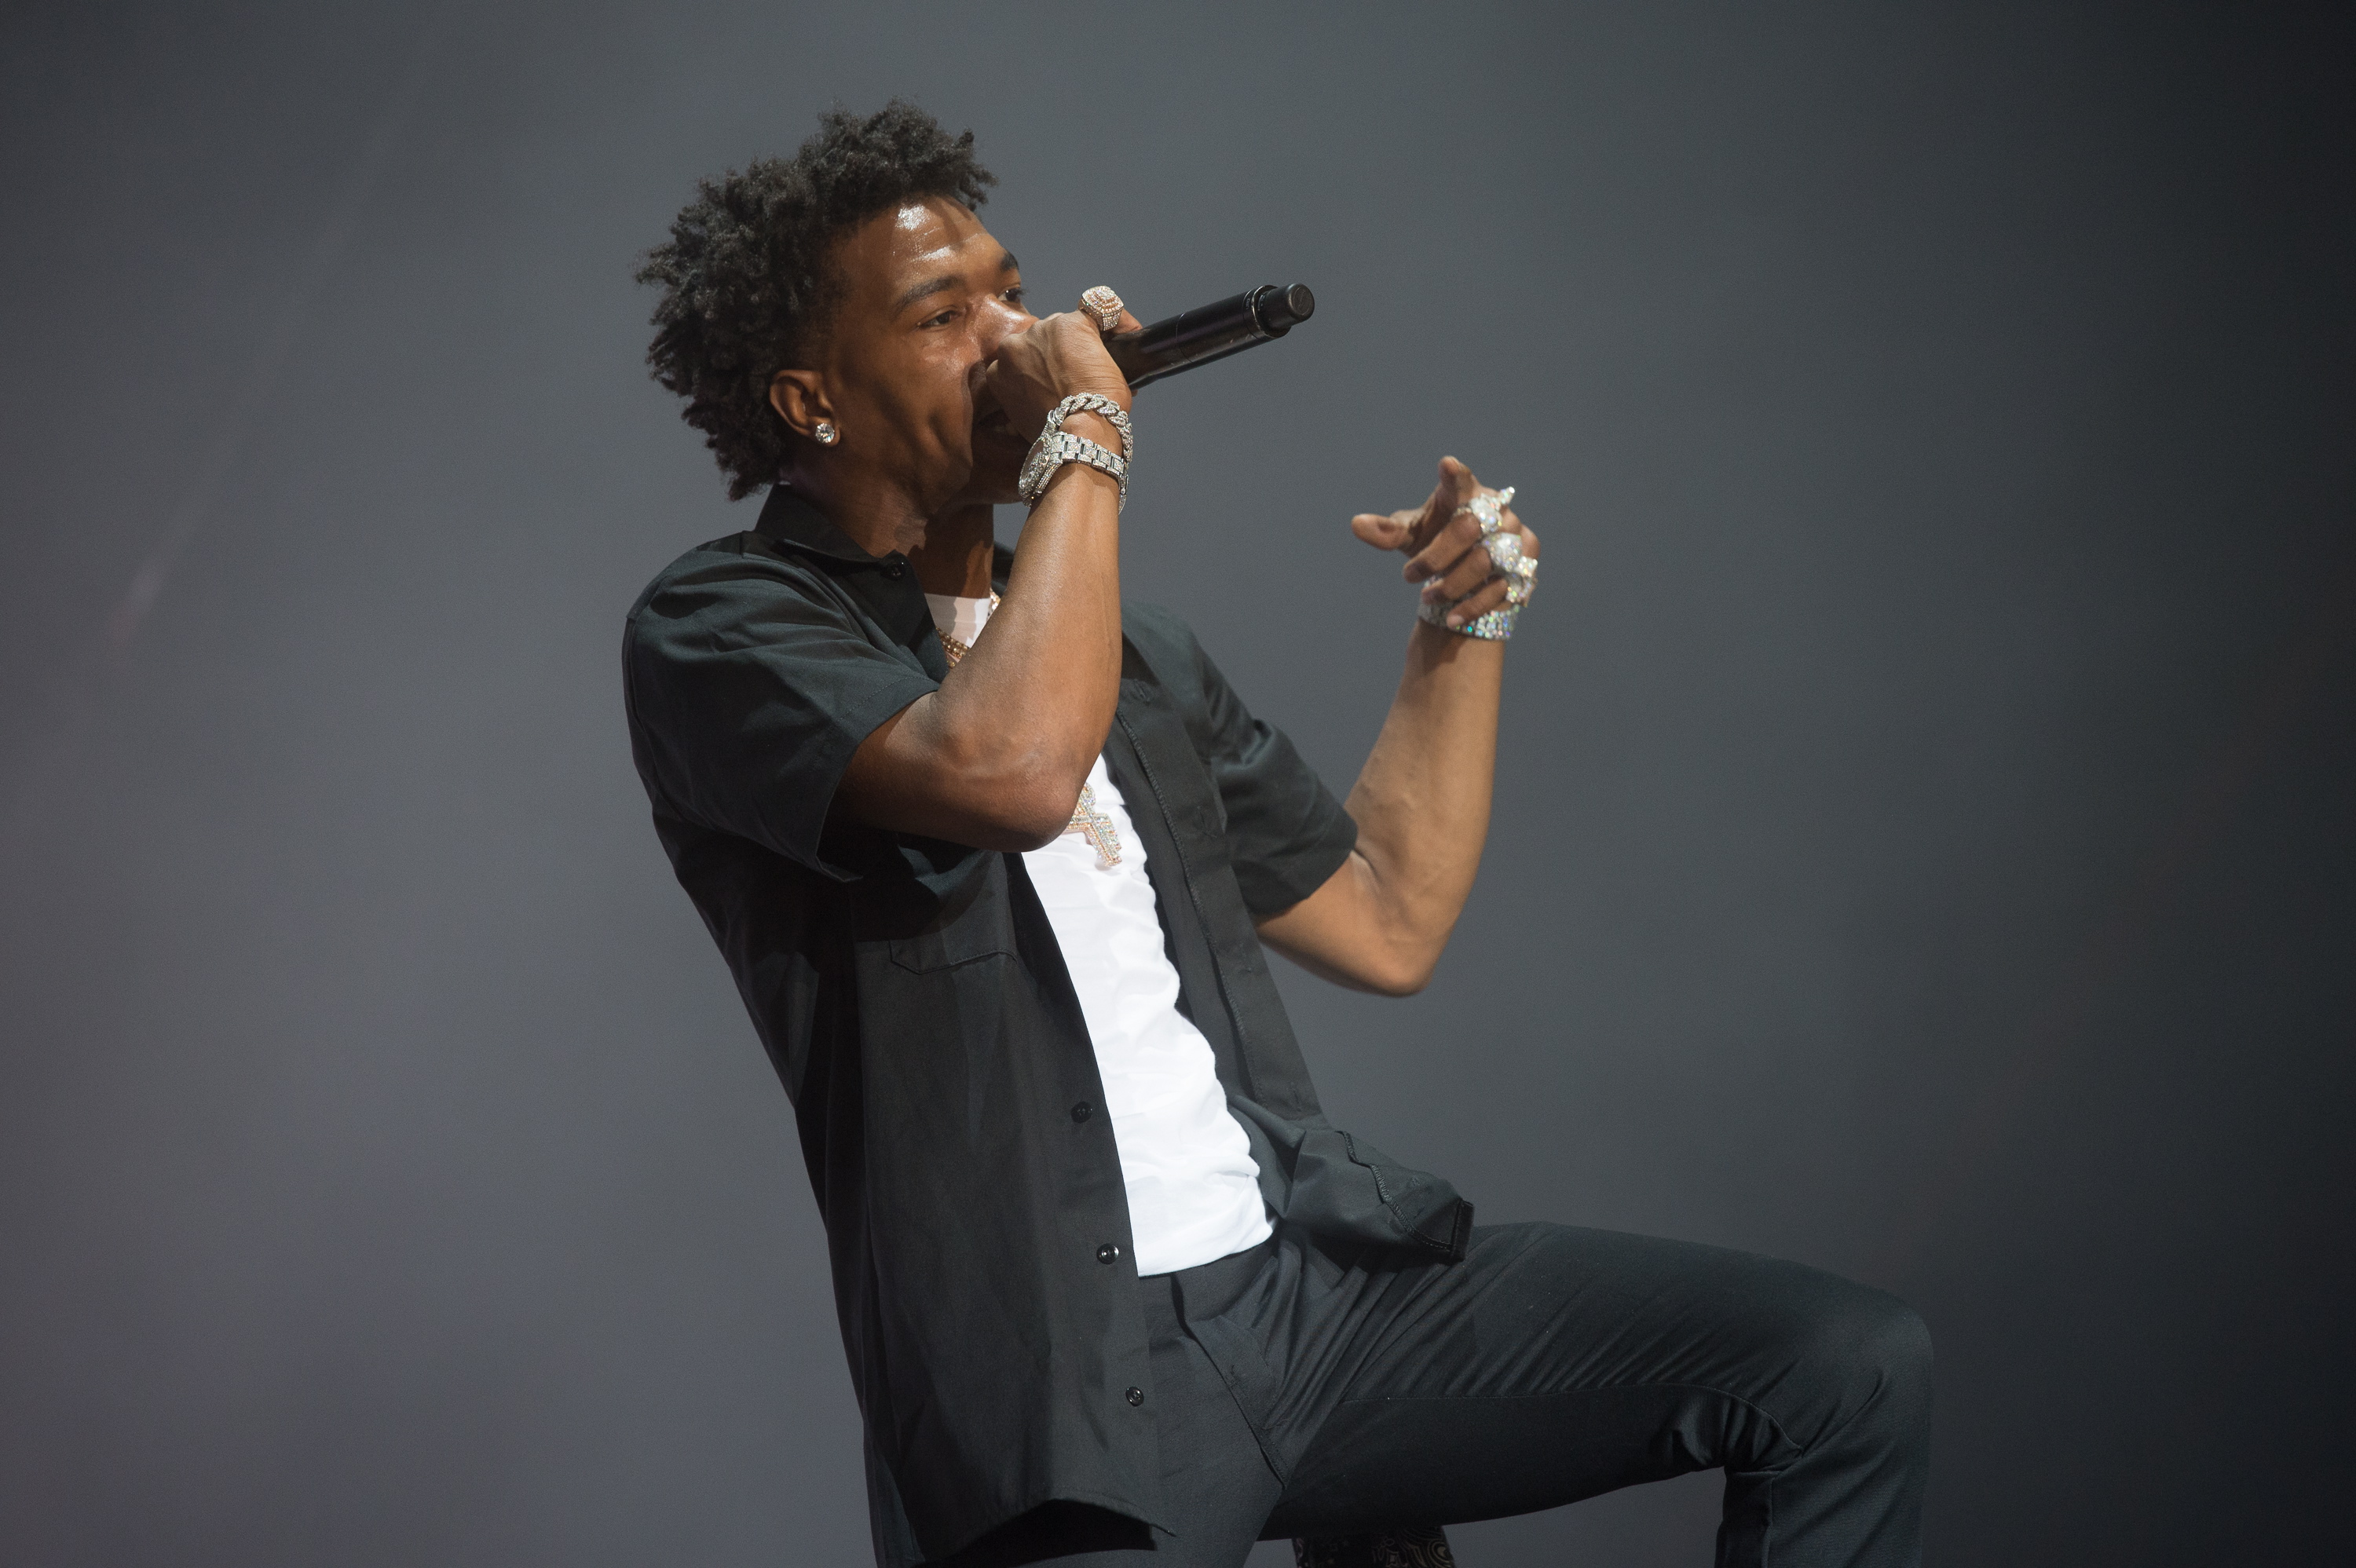 Lil Baby Performs at Reading Festival 2019 Sunday - Little John&apos;s Farm, Reading